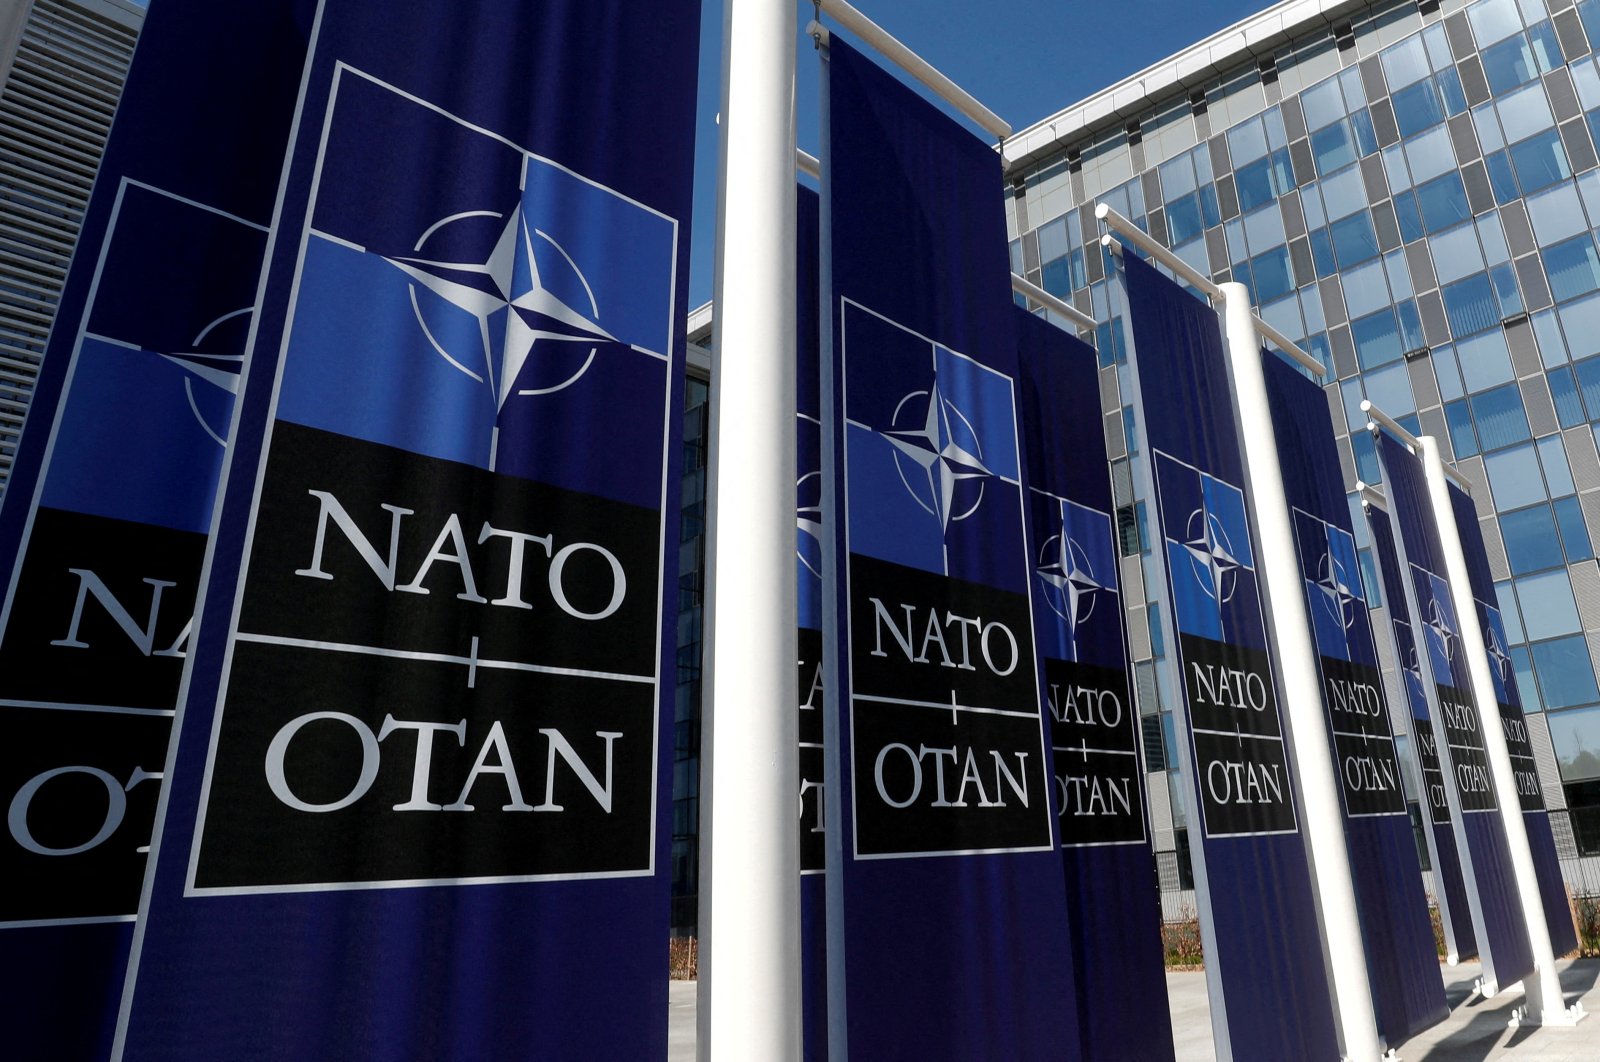 Banners displaying the NATO logo at the entrance of new NATO headquarters, in Brussels, Belgium, April 19, 2018. (Reuters Photo)